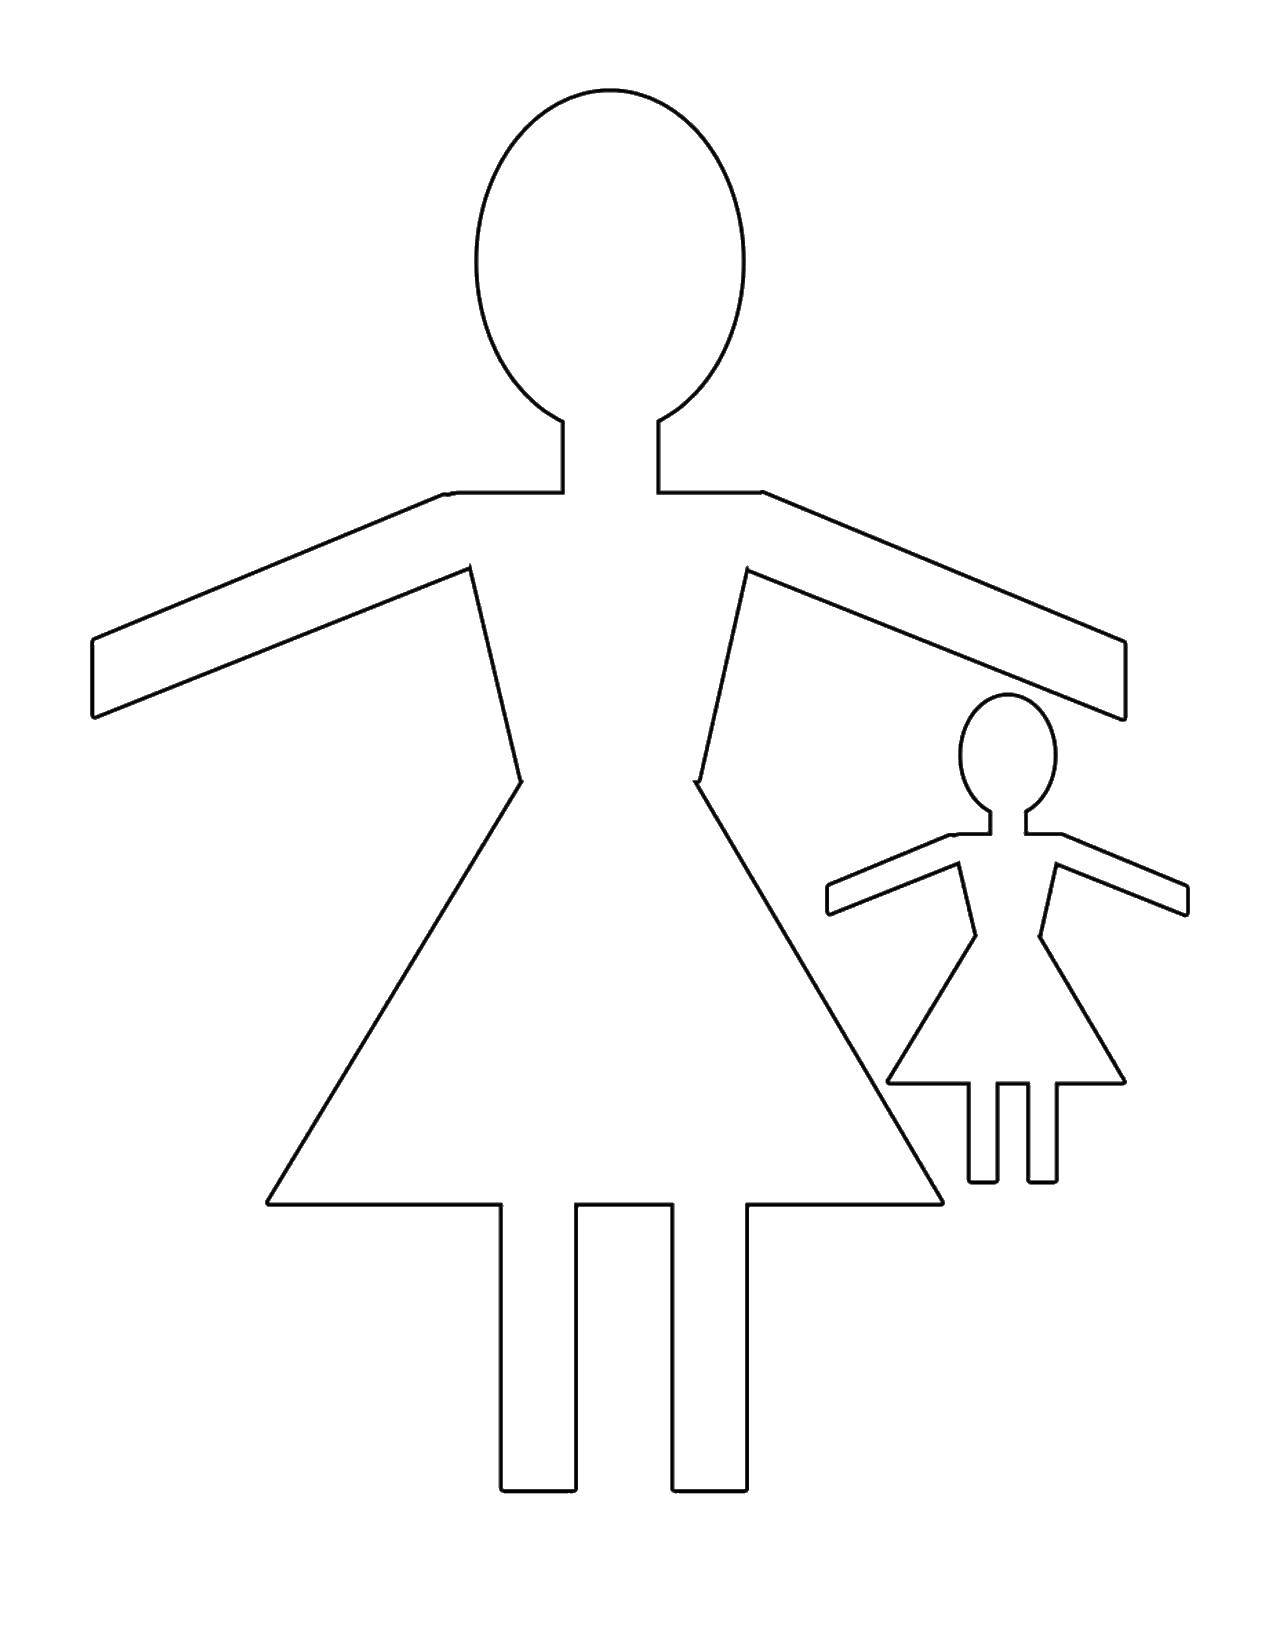 Coloring Paper dolls. Category The contour of the doll . Tags:  Outline .